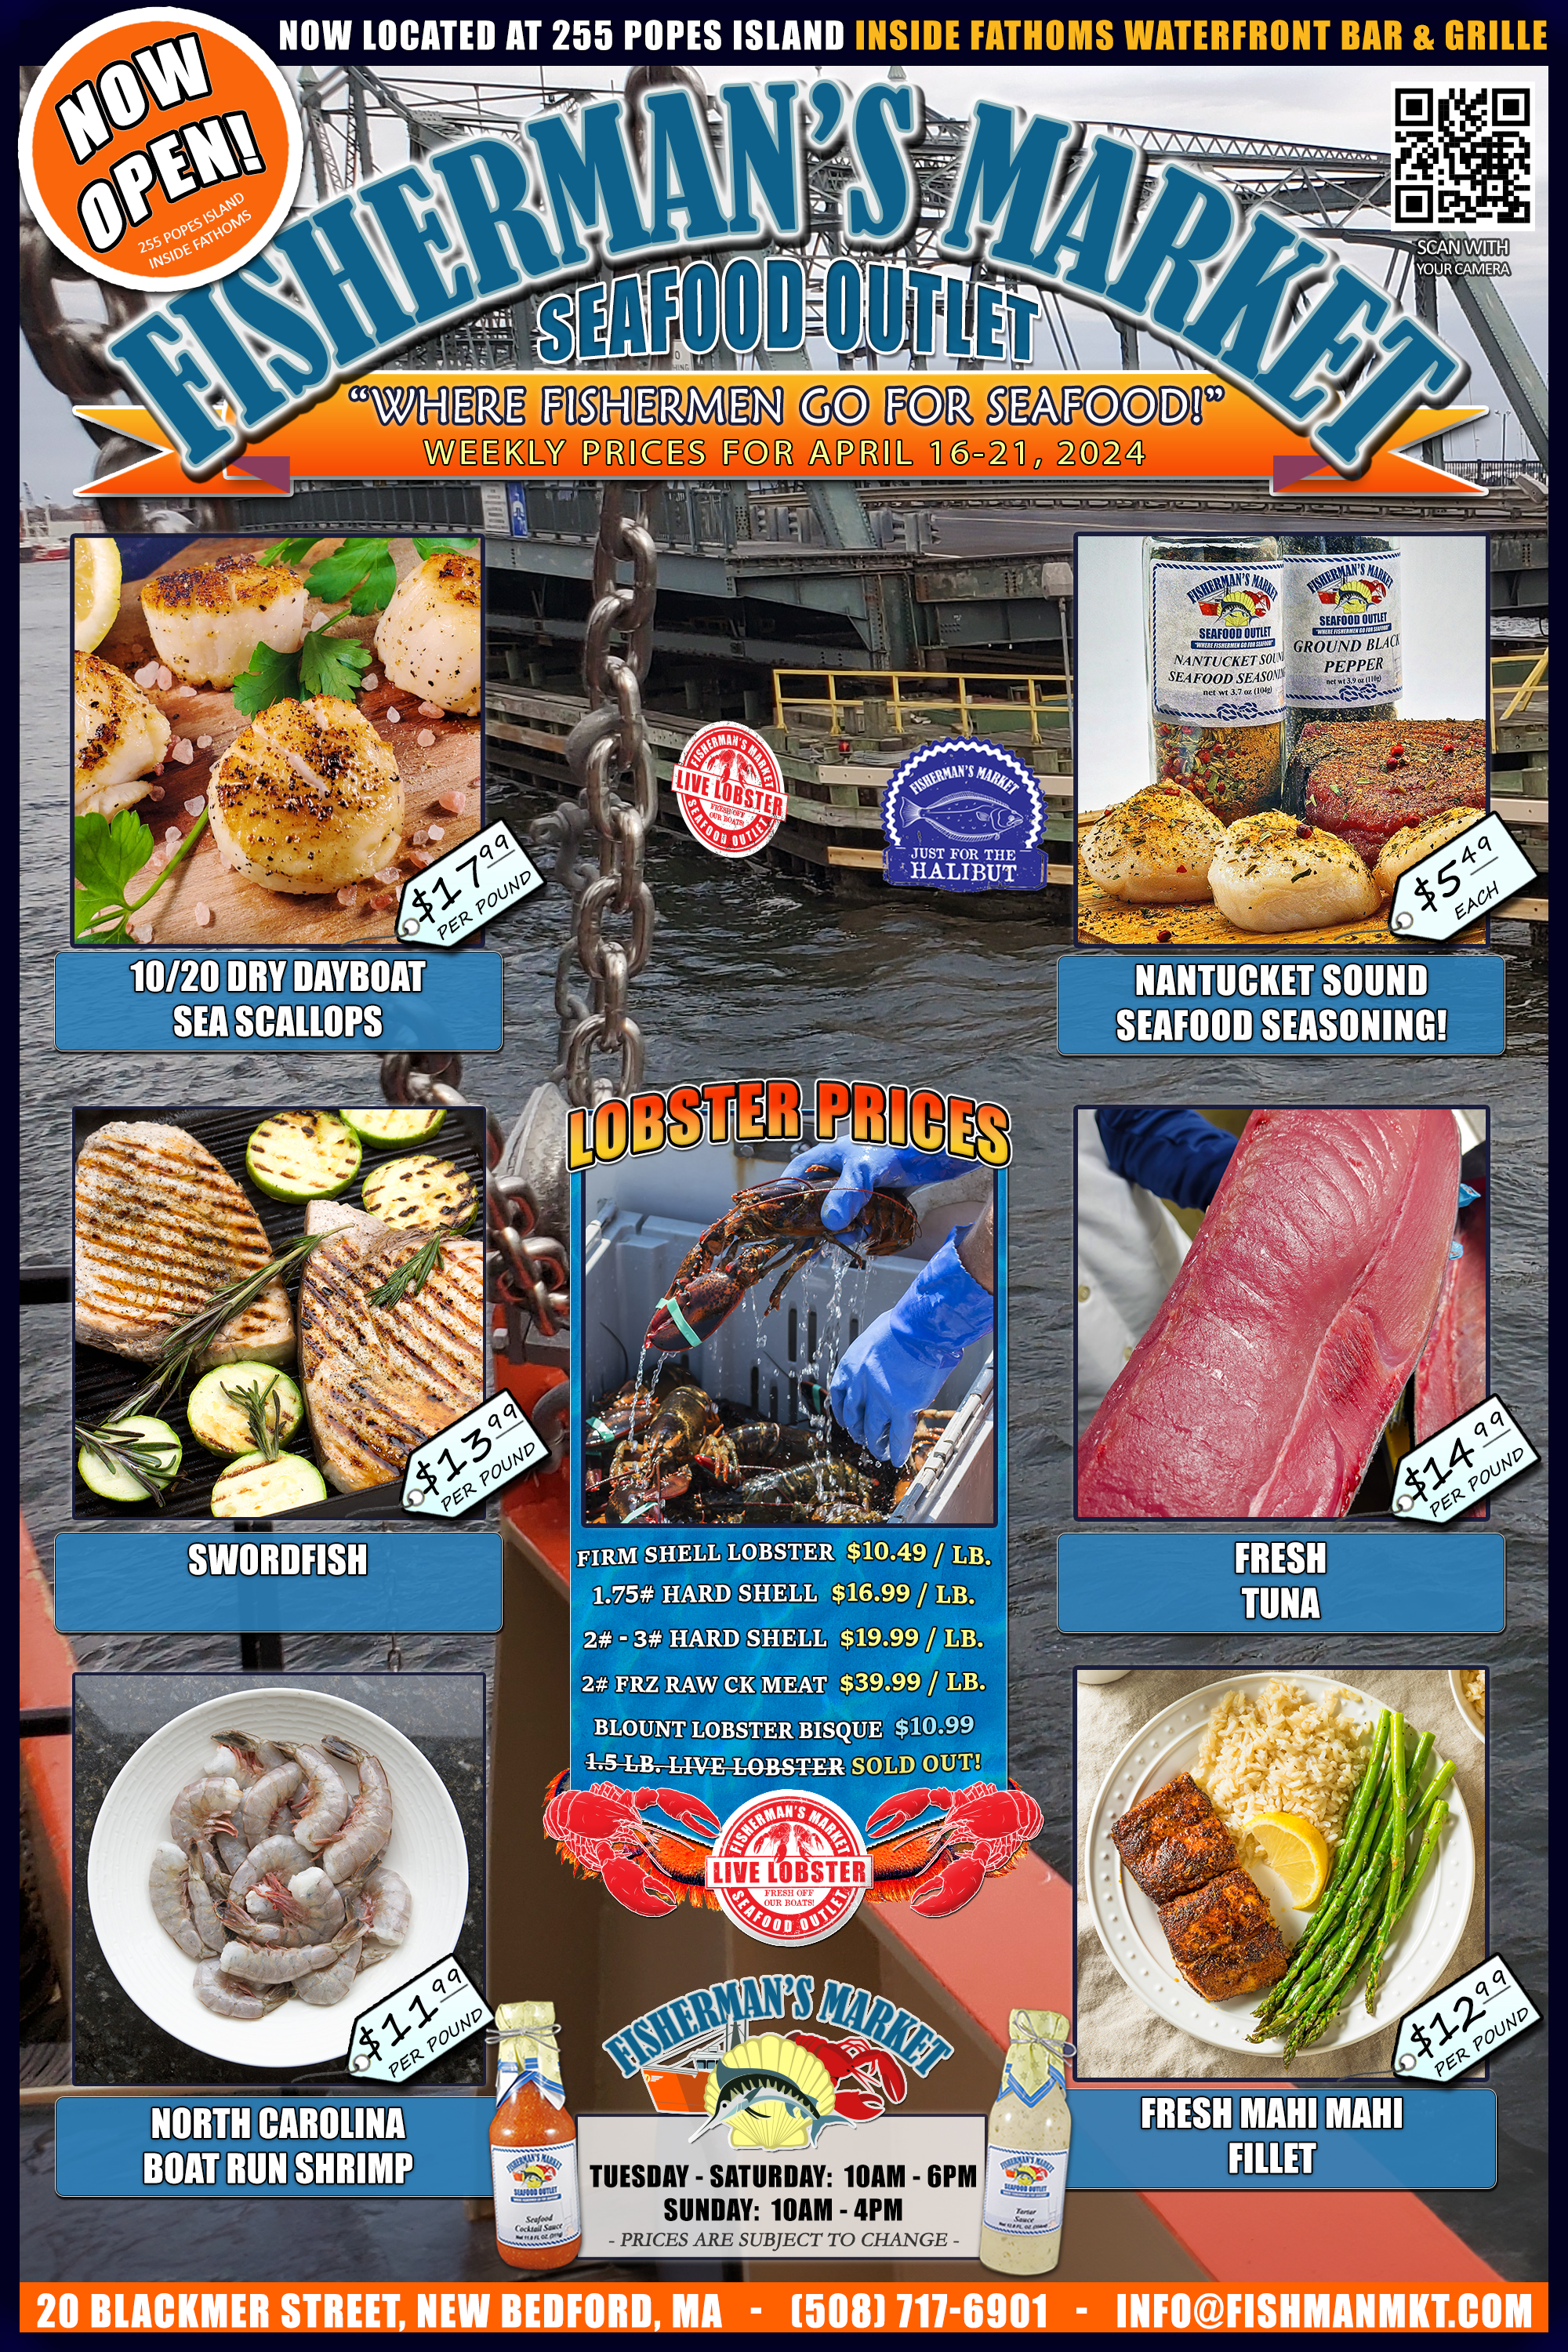 Fisherman's Market Seafood Outlet Weekly Specials &amp; Deals!